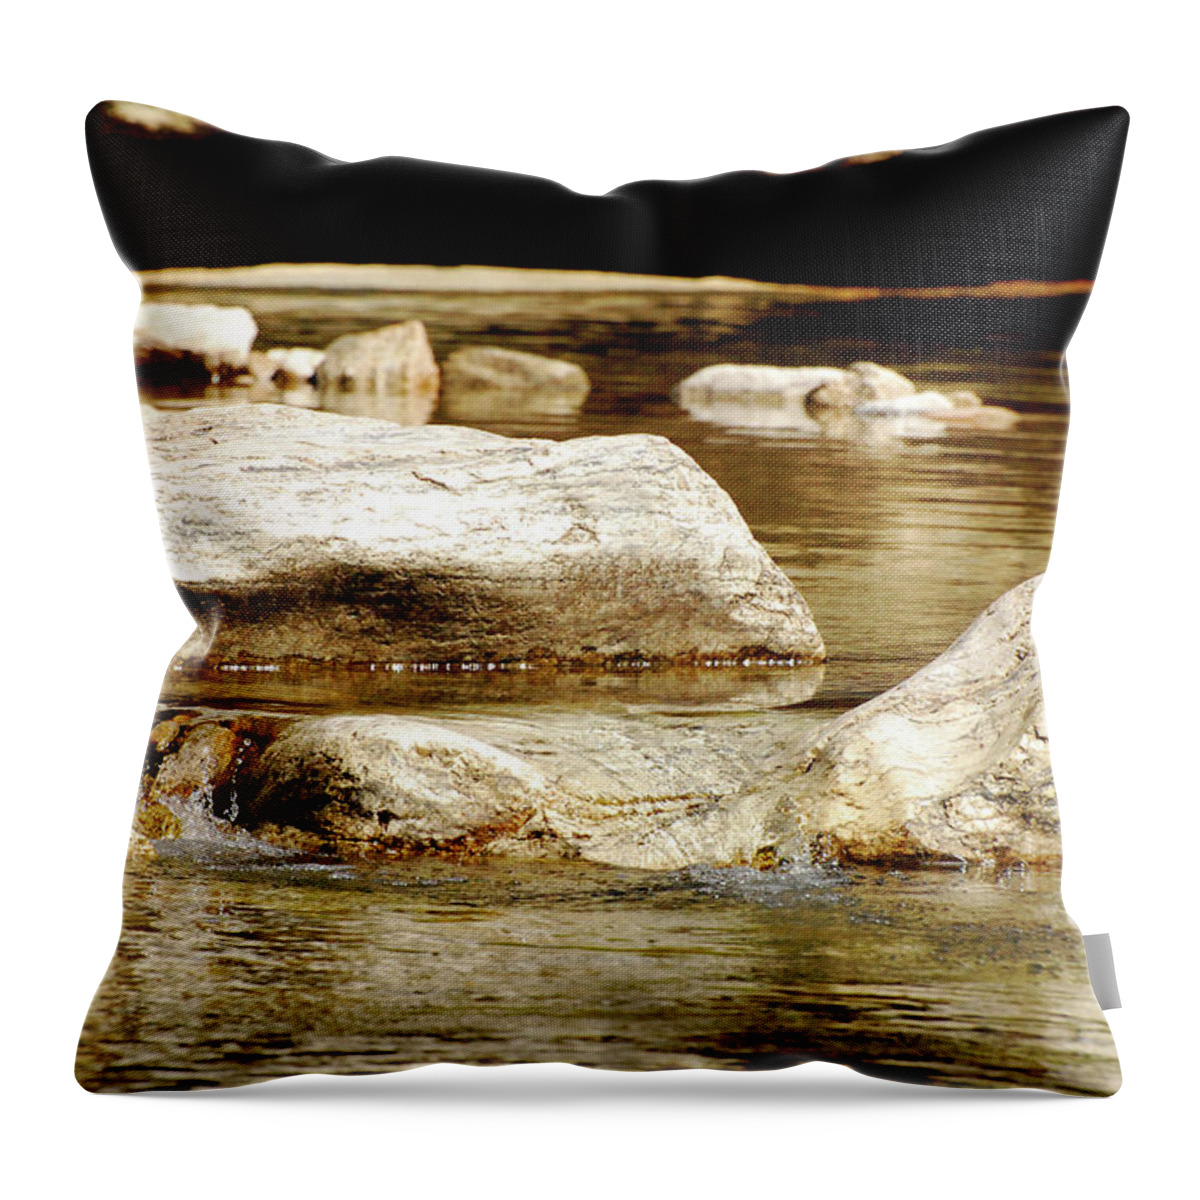 Landscape Throw Pillow featuring the photograph Golden Stream by Nancy Landry